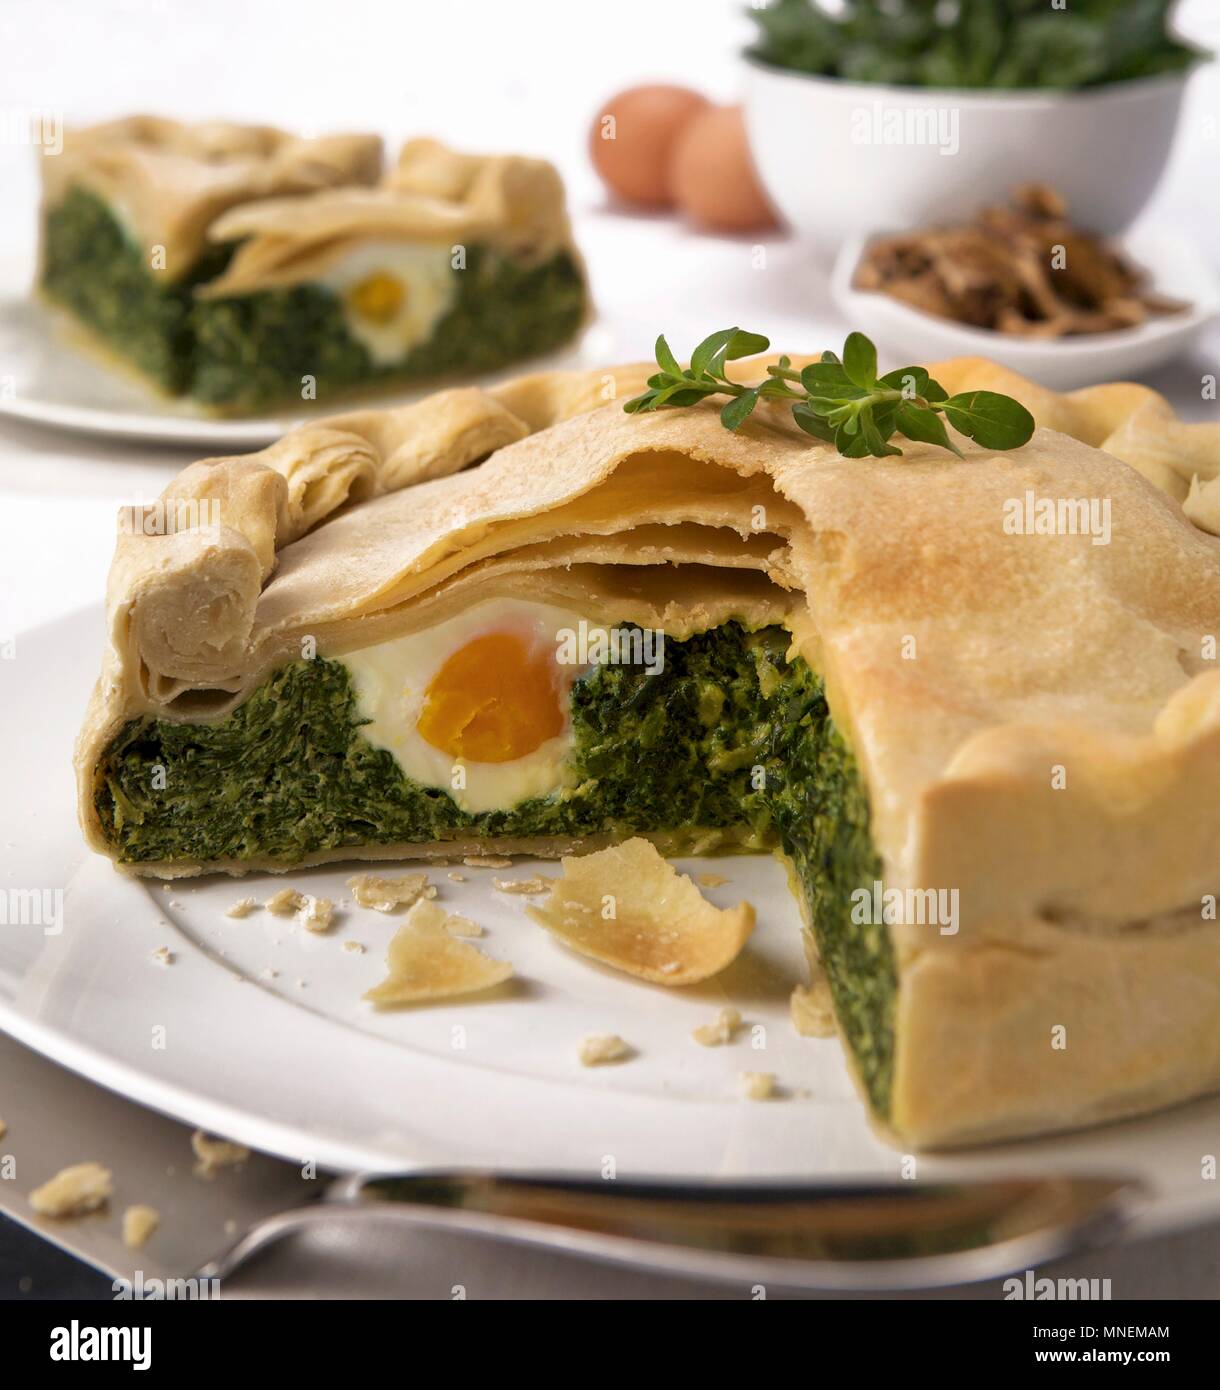 Torta pasqualina (spicy Easter cake with egg, Italy) Stock Photo